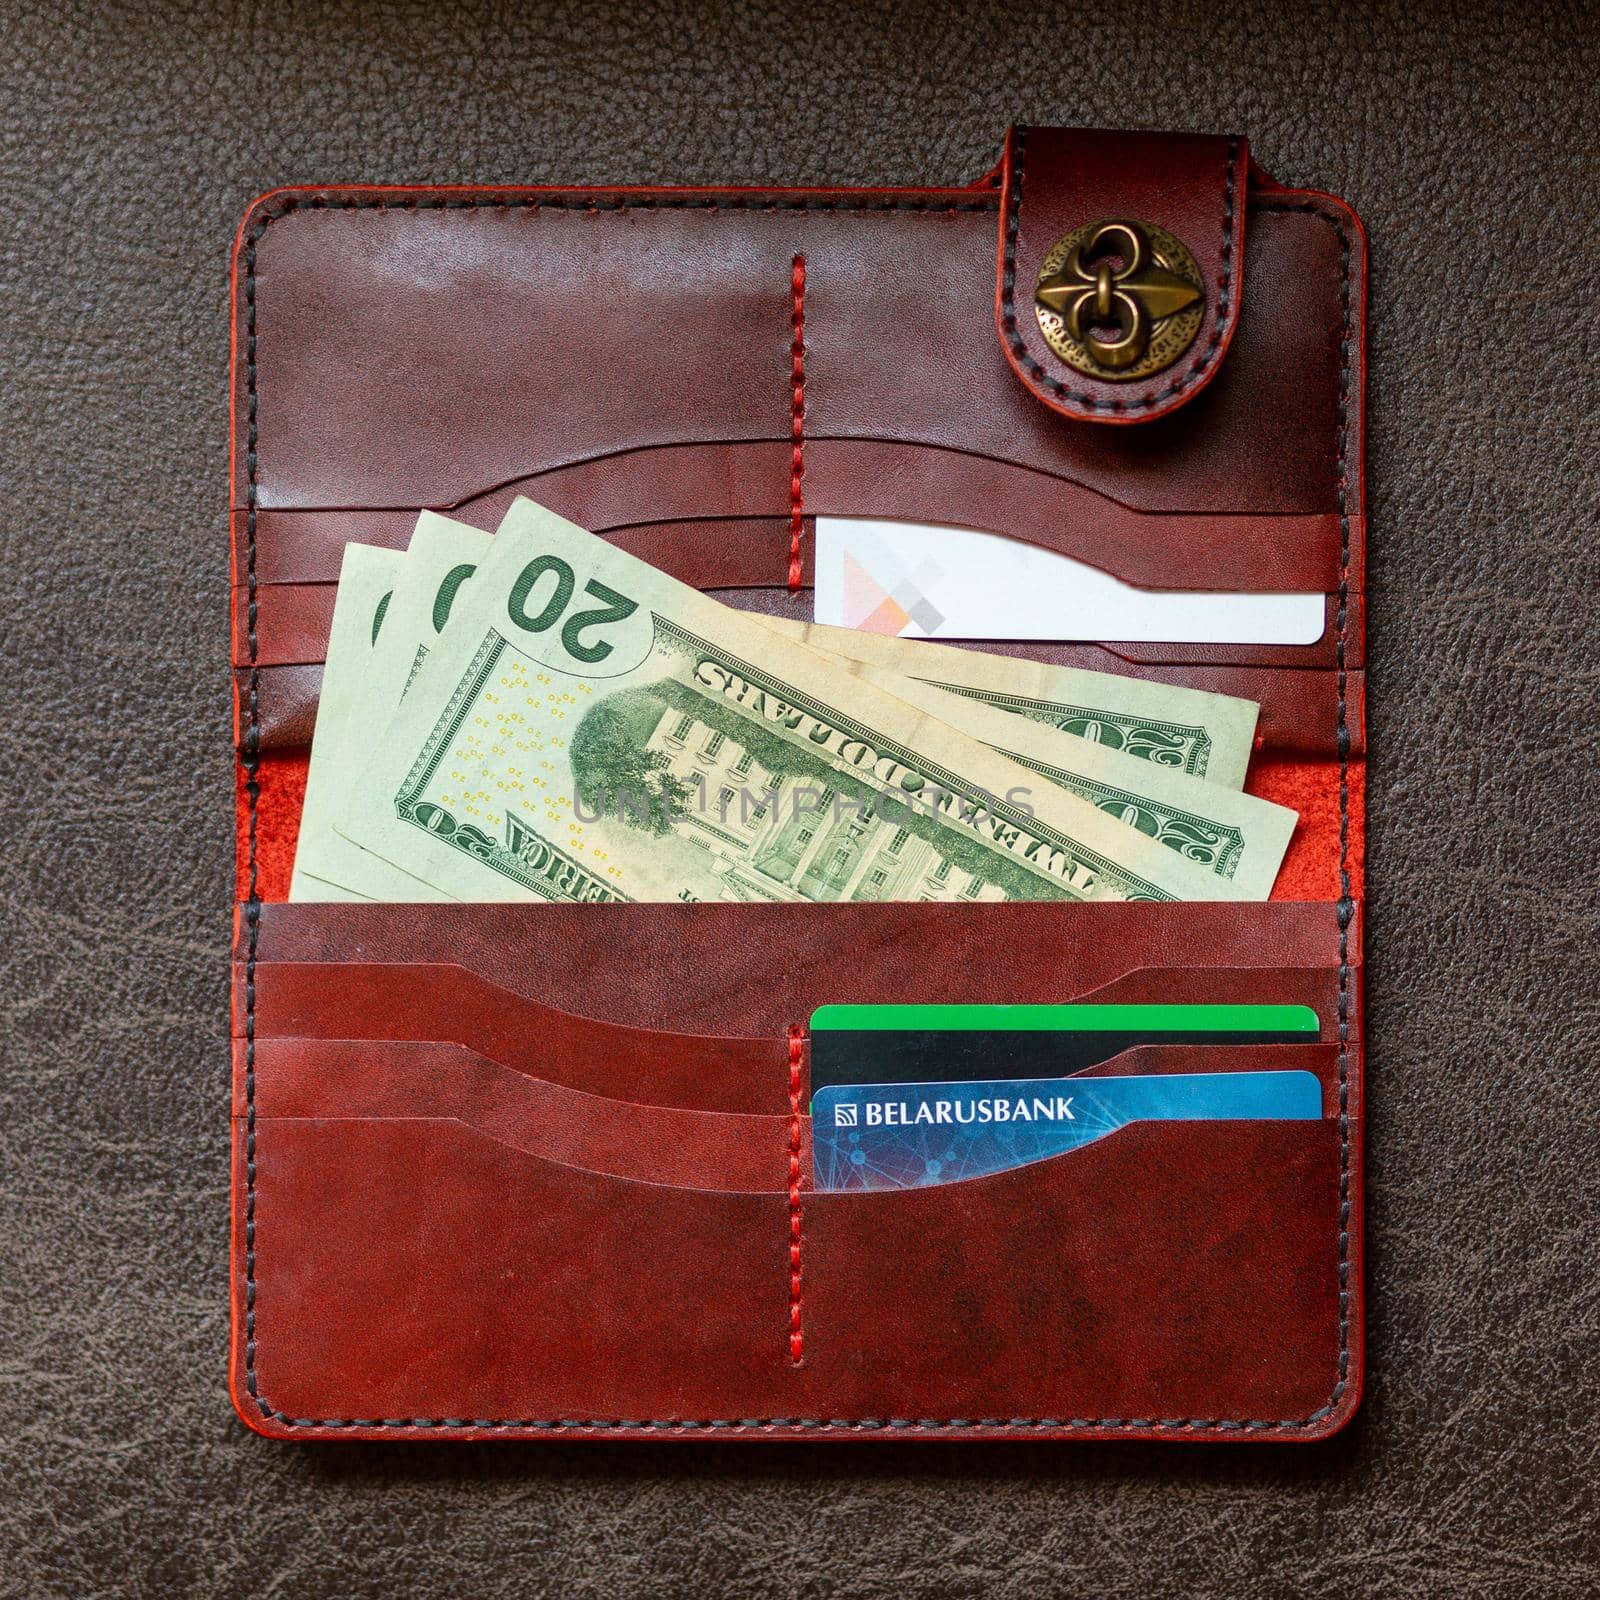 Open red leather clutch with money and credit cards on brown leather background.